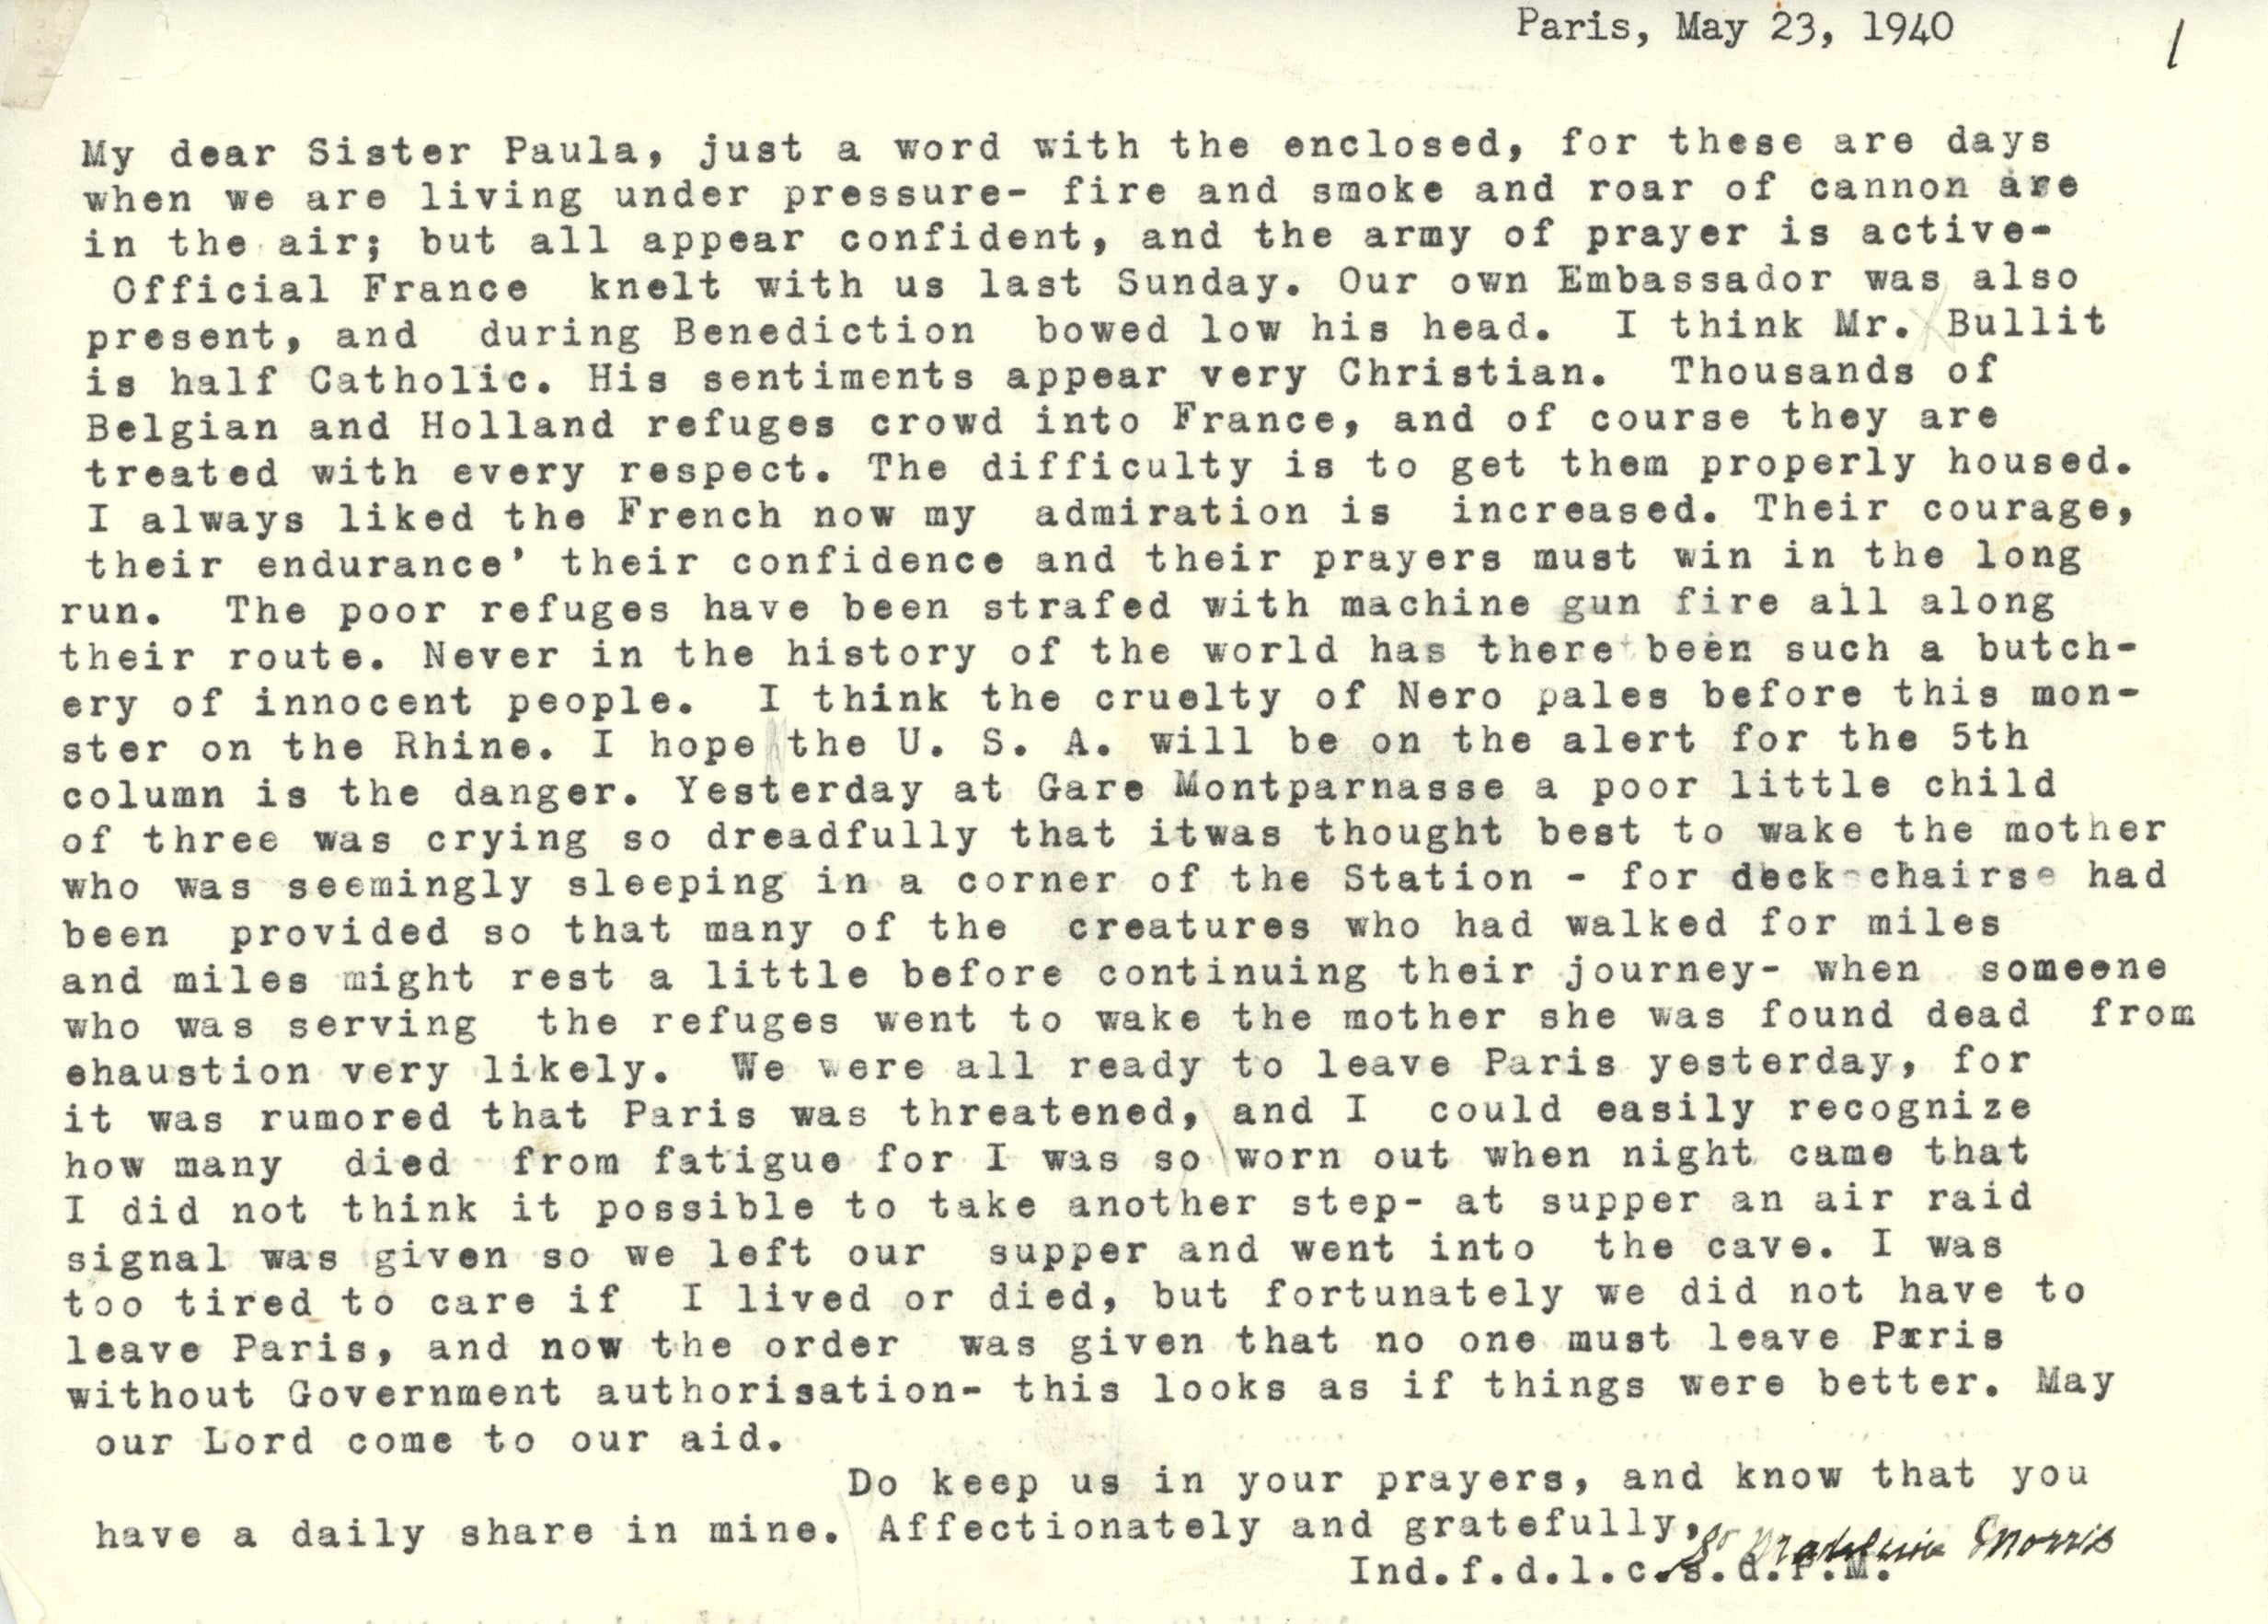 Letter from Sister Madeleine Morris before her exodus from Paris. Sent to the Eastern Province at Emmitsburg, MD.